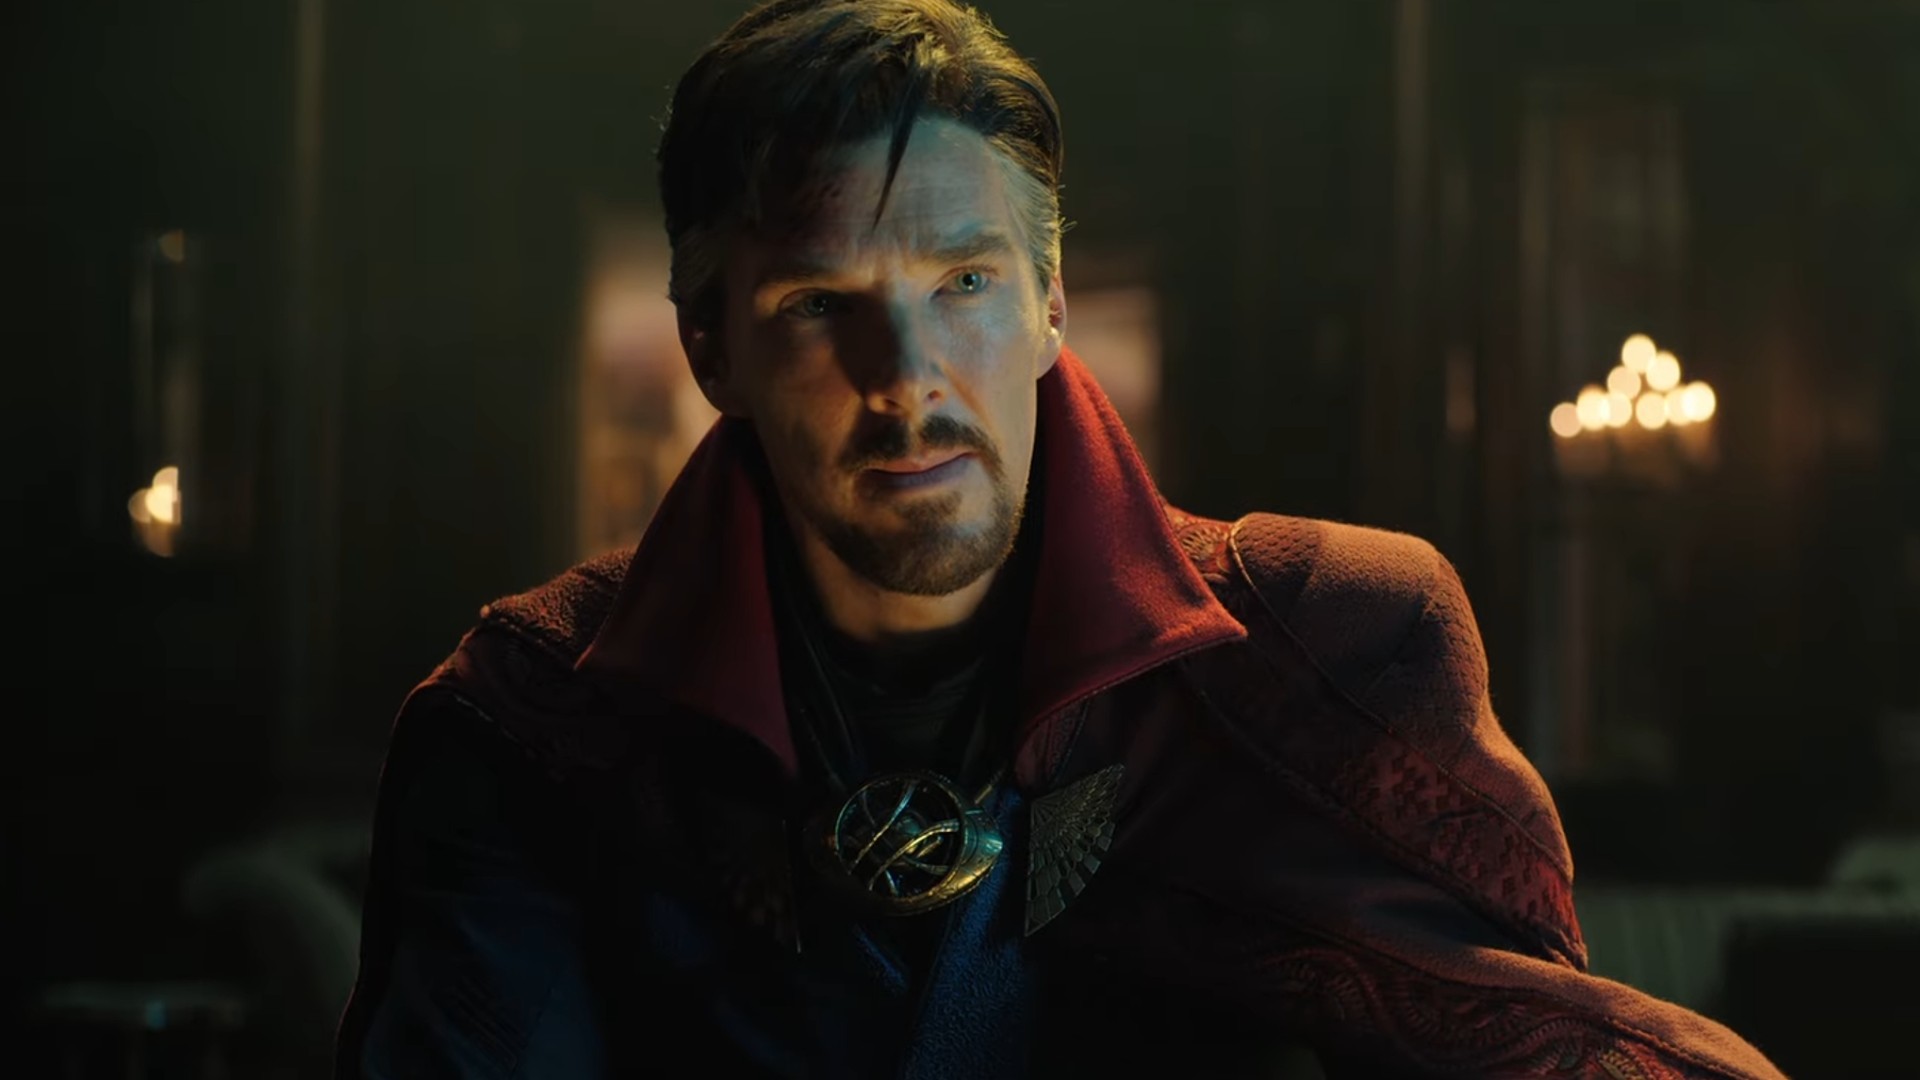 The rumored Doctor Strange 2 cameos that never showed